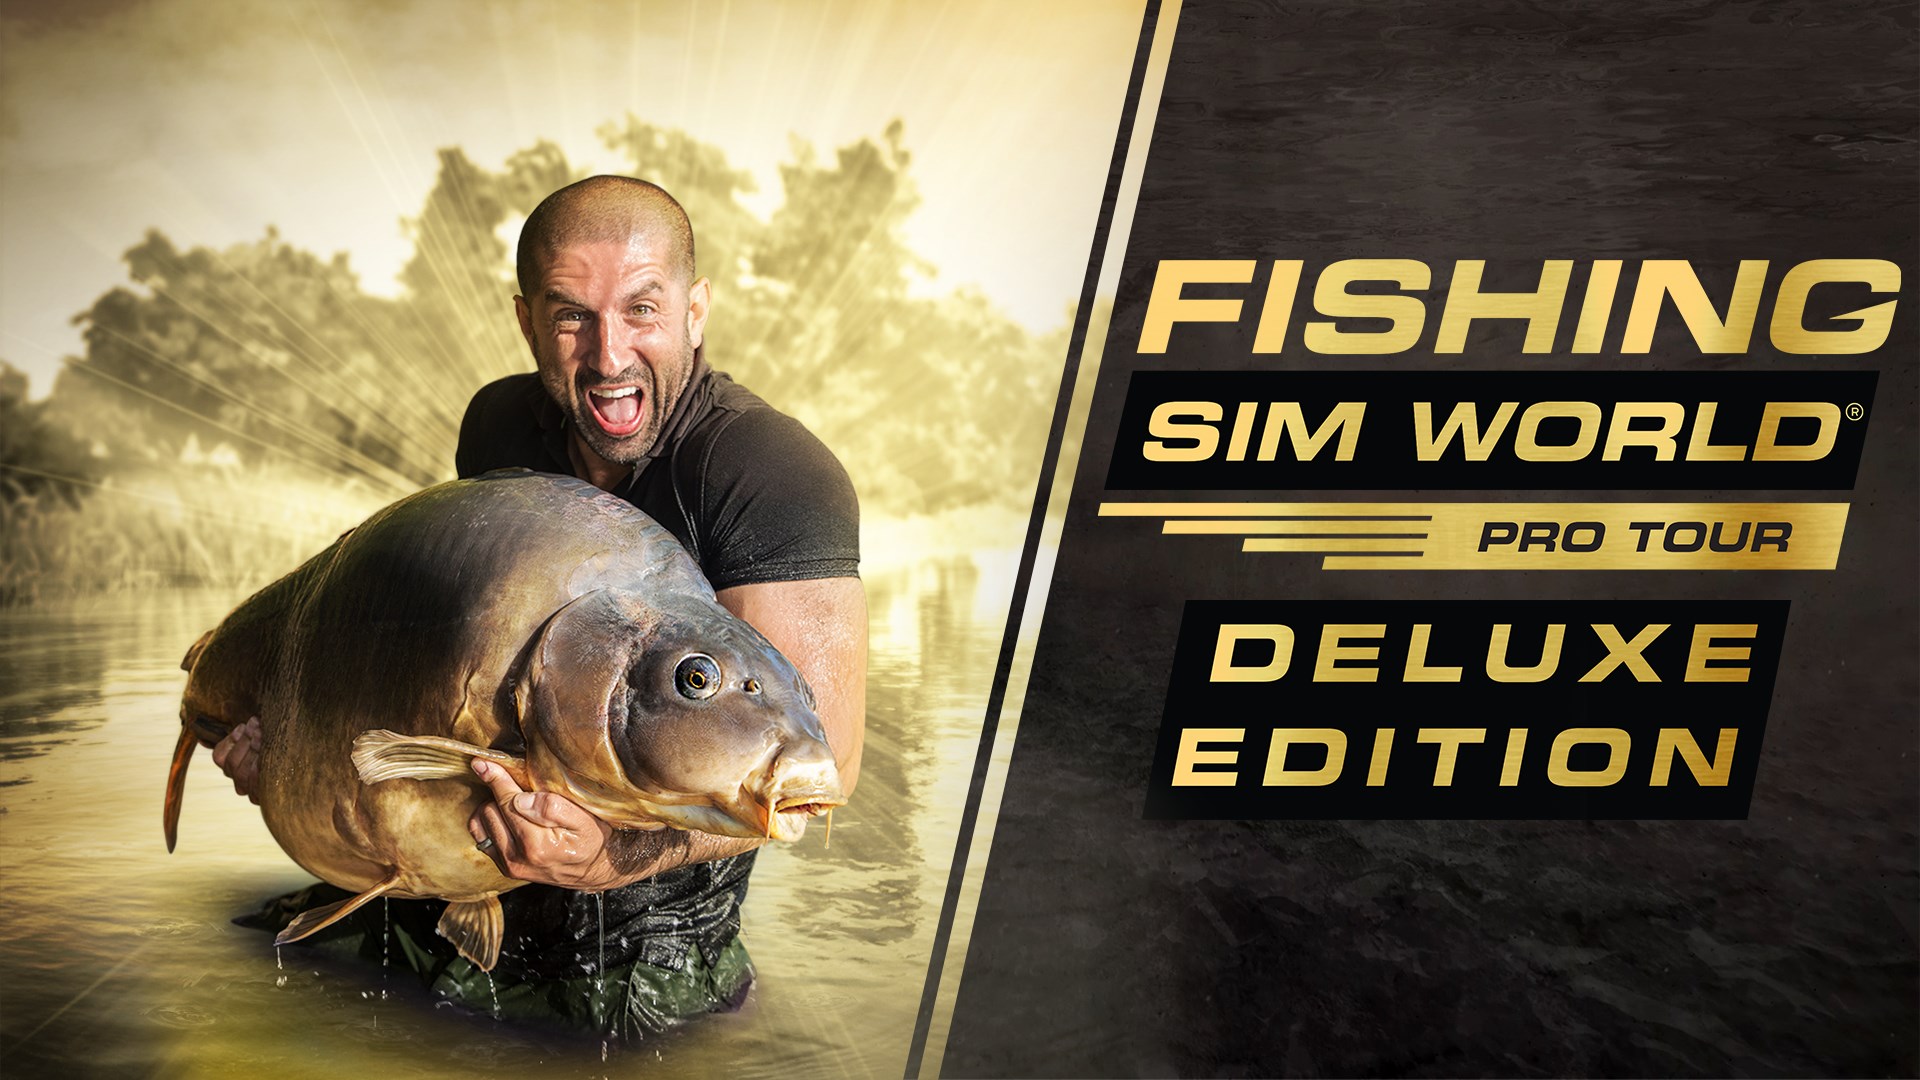 Buy Fishing Sim World®: Pro Tour Deluxe Edition